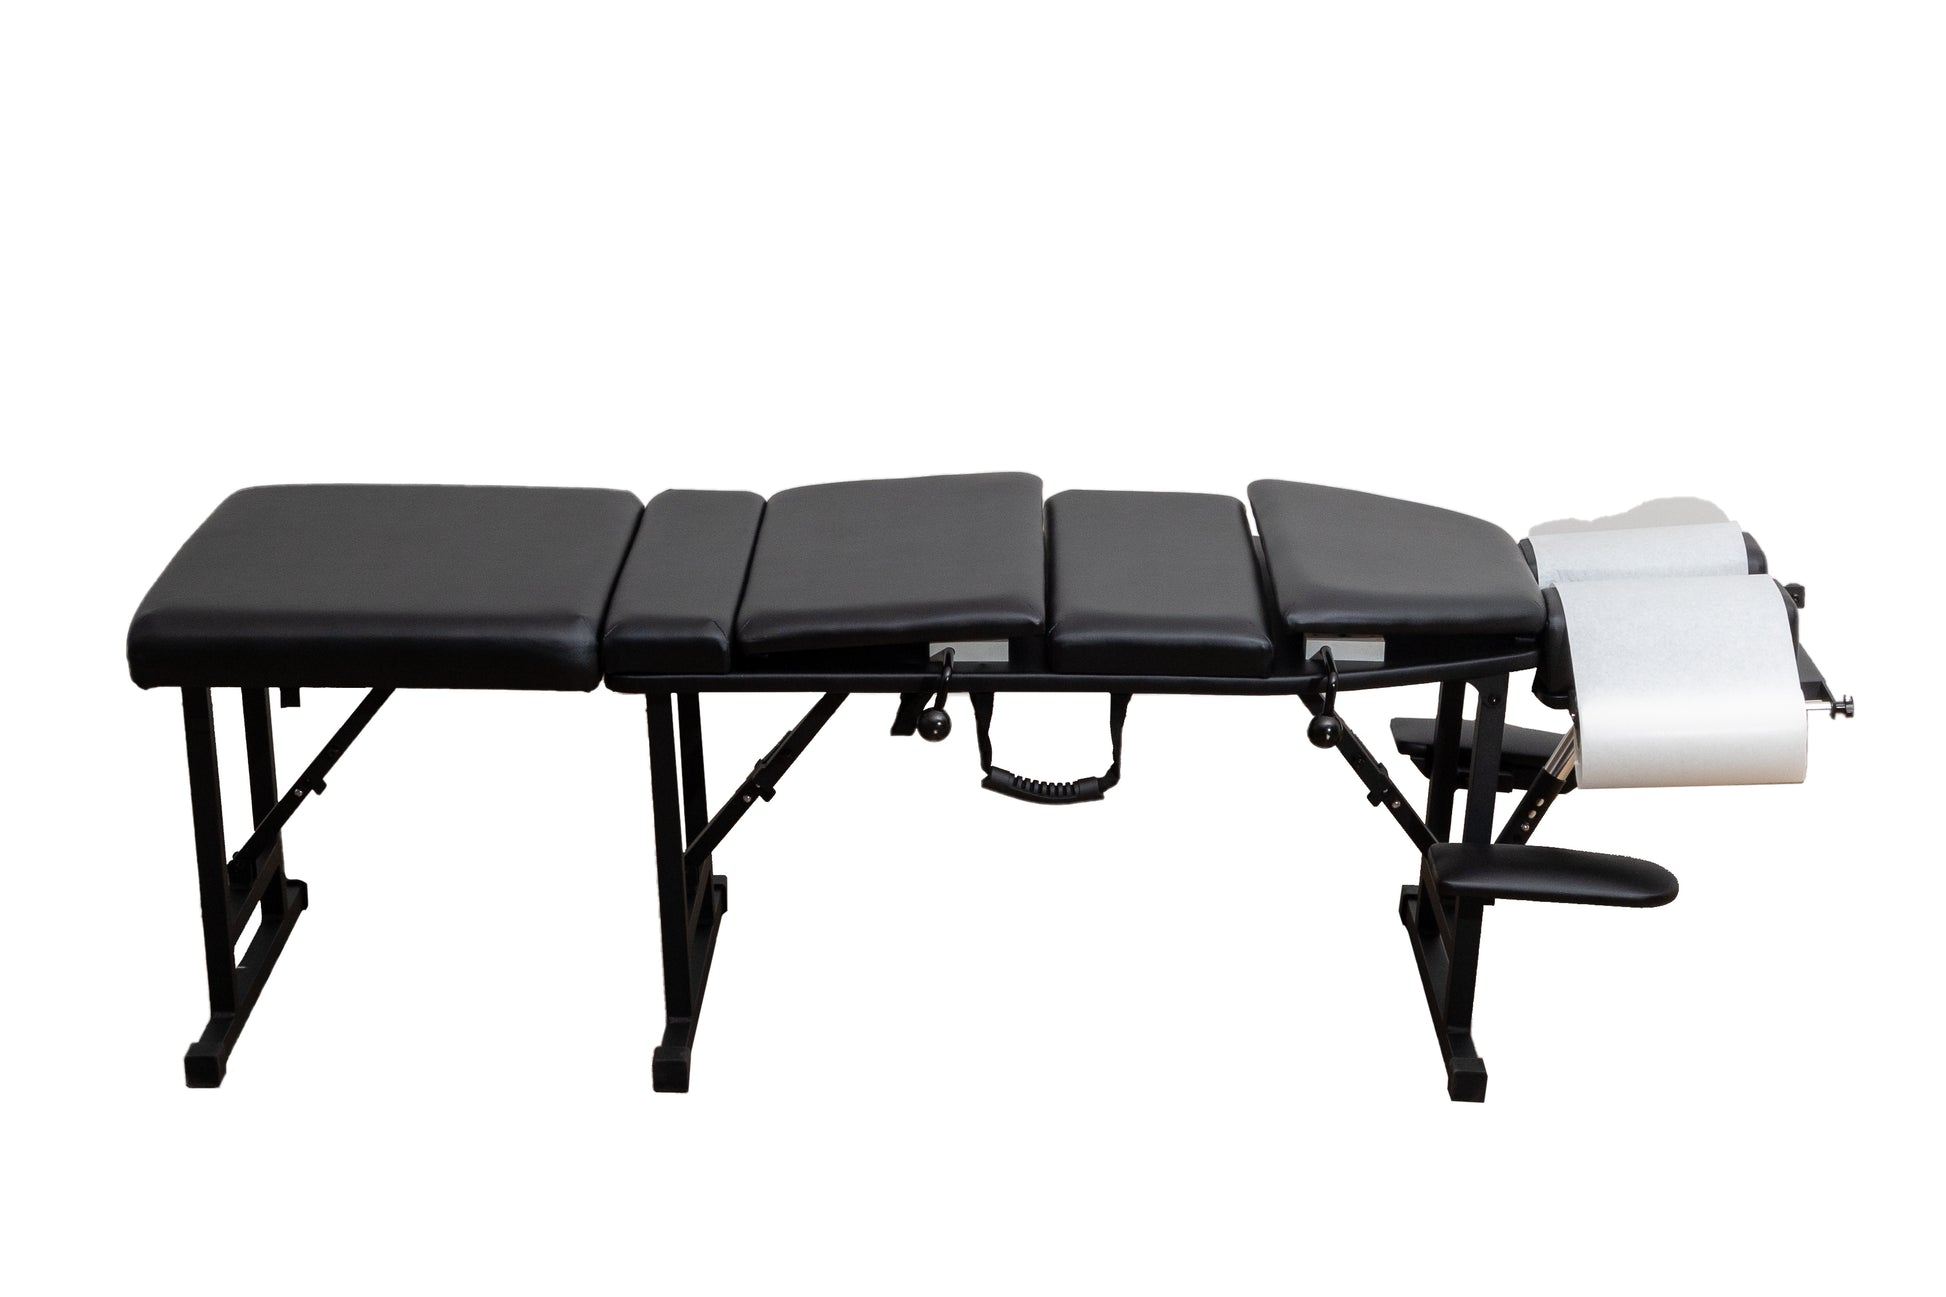 Community Quest Portable Chiropractic Table